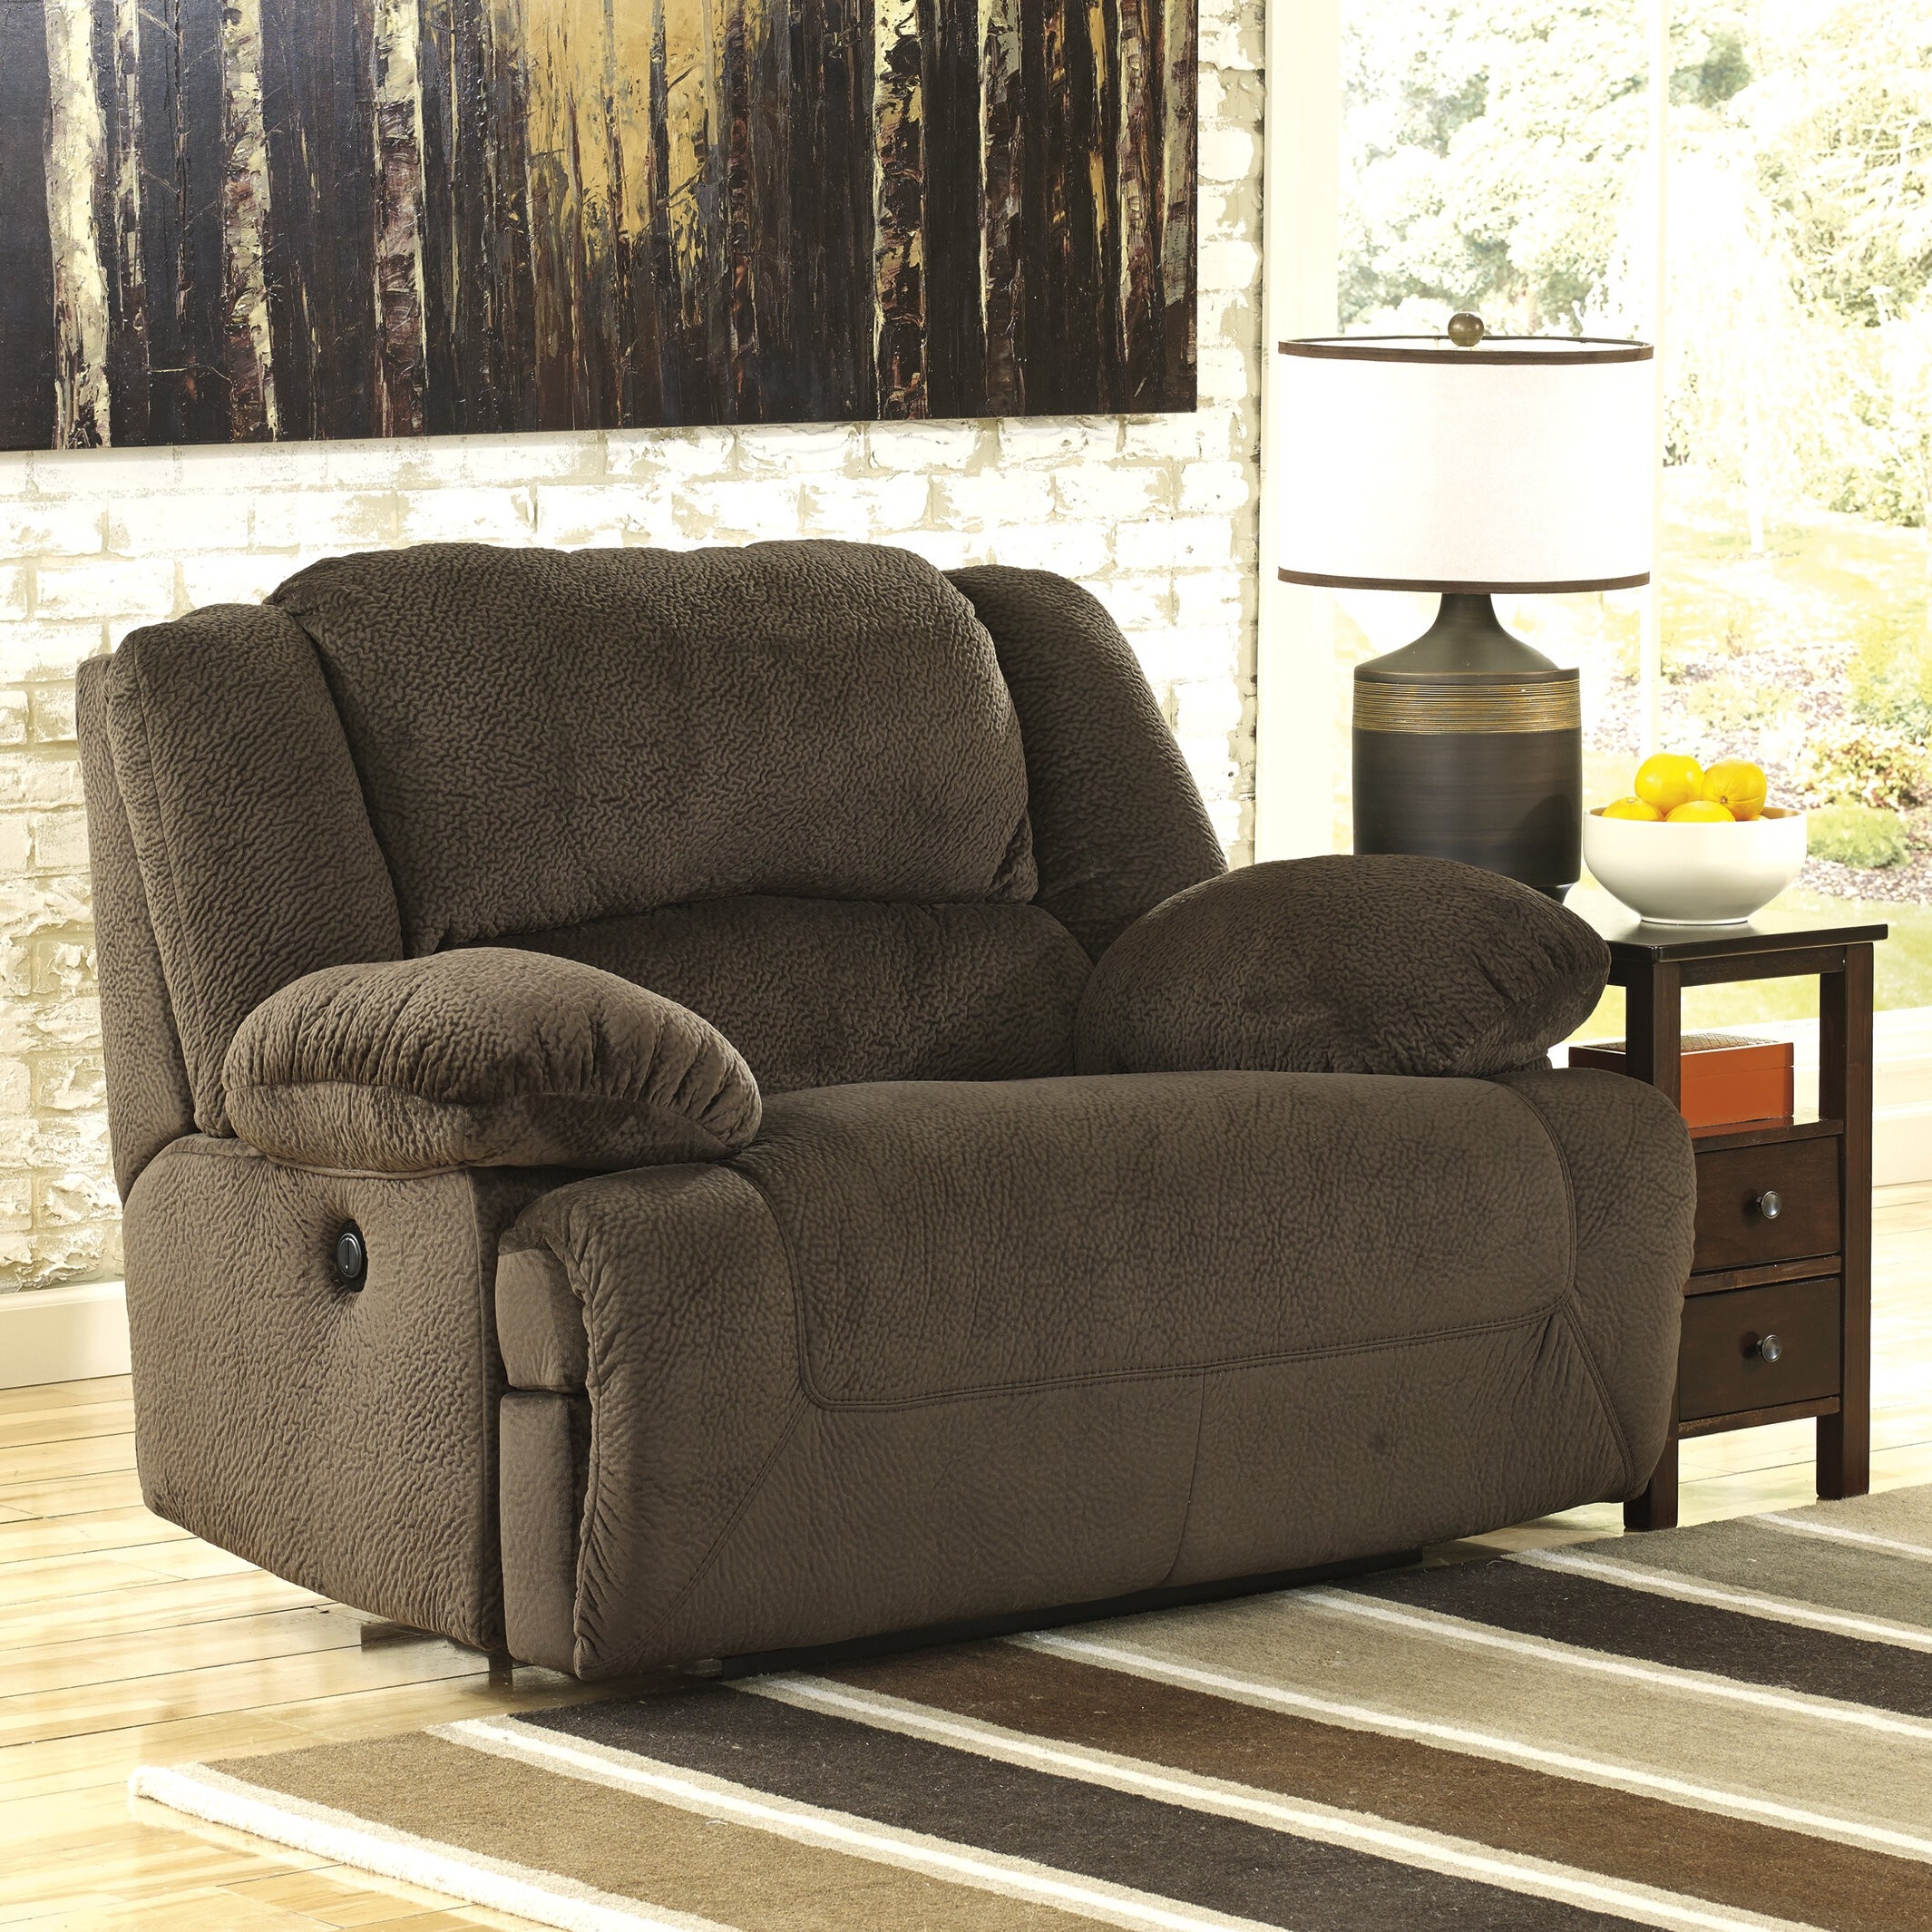 Extra Wide Recliner Chair 